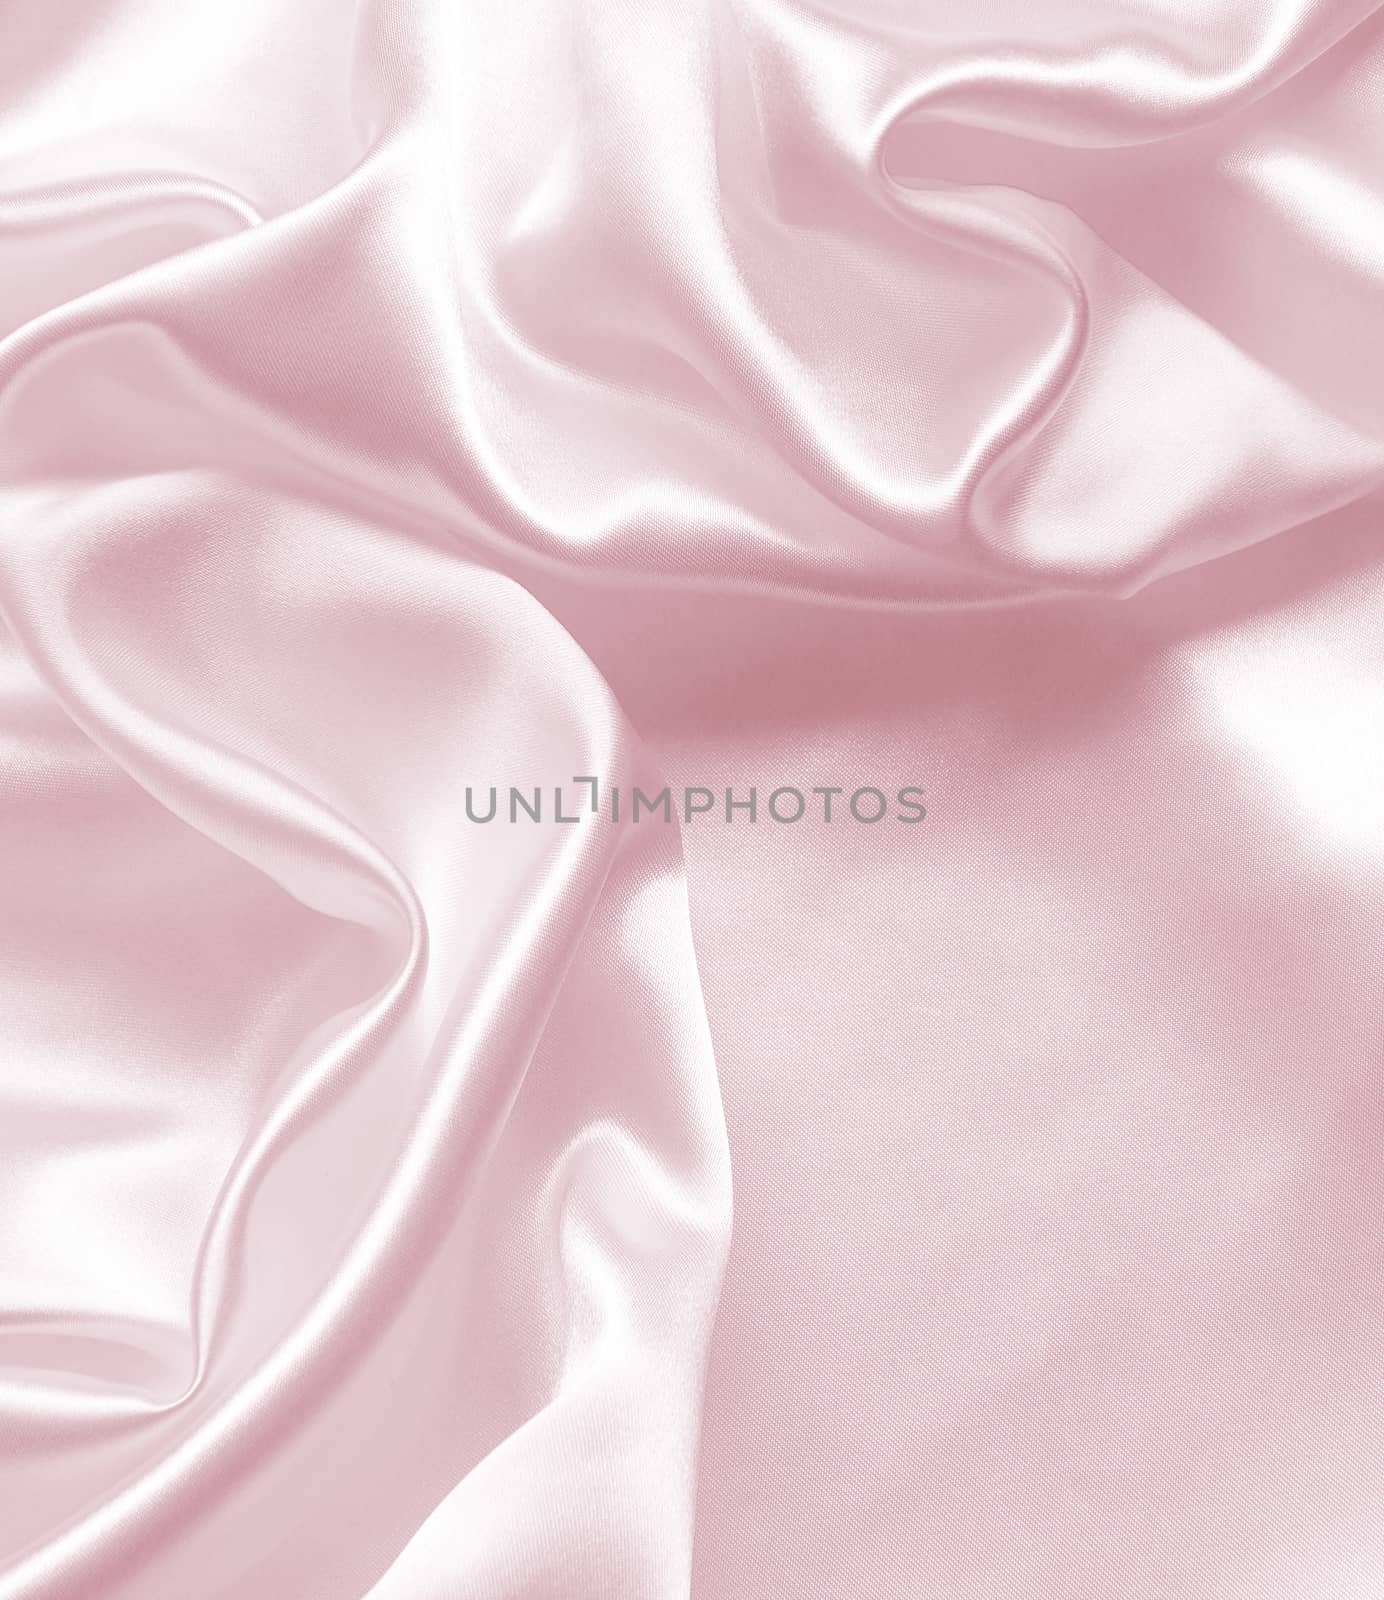 Smooth elegant pink silk can use as background 
